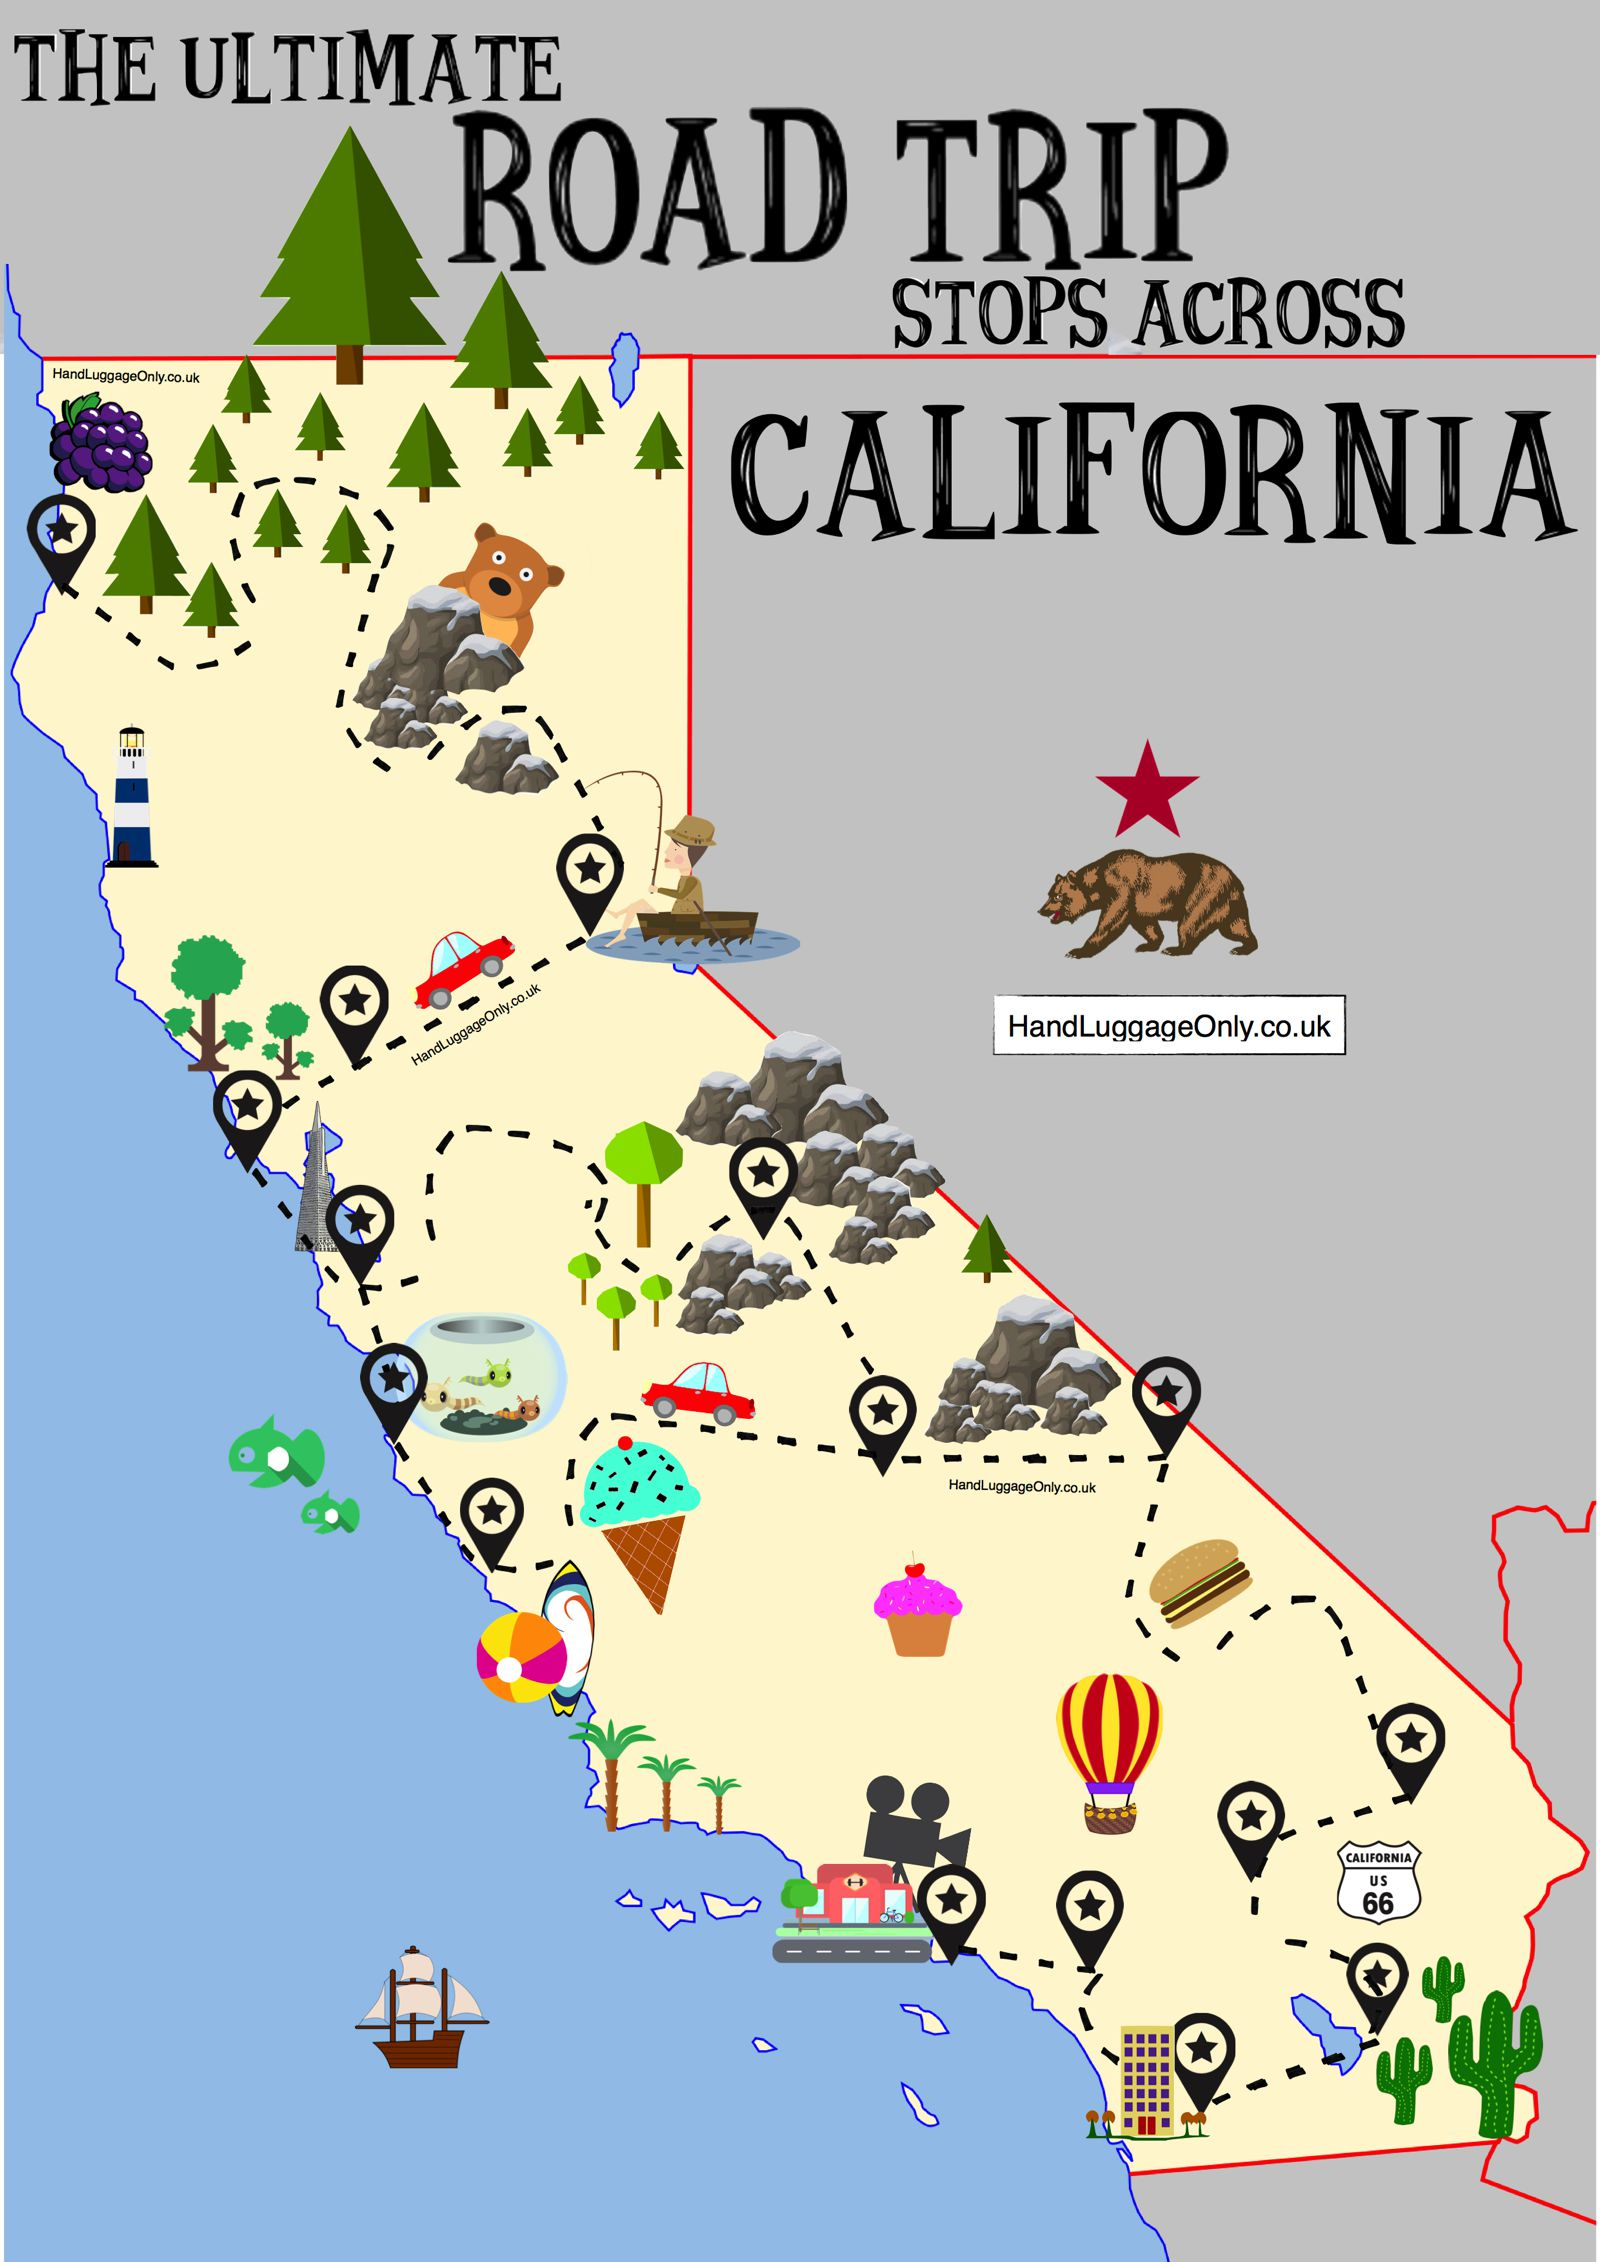 The Ultimate Road Trip Map Of Places To Visit In California - Hand - Where Can I Buy A Map Of California